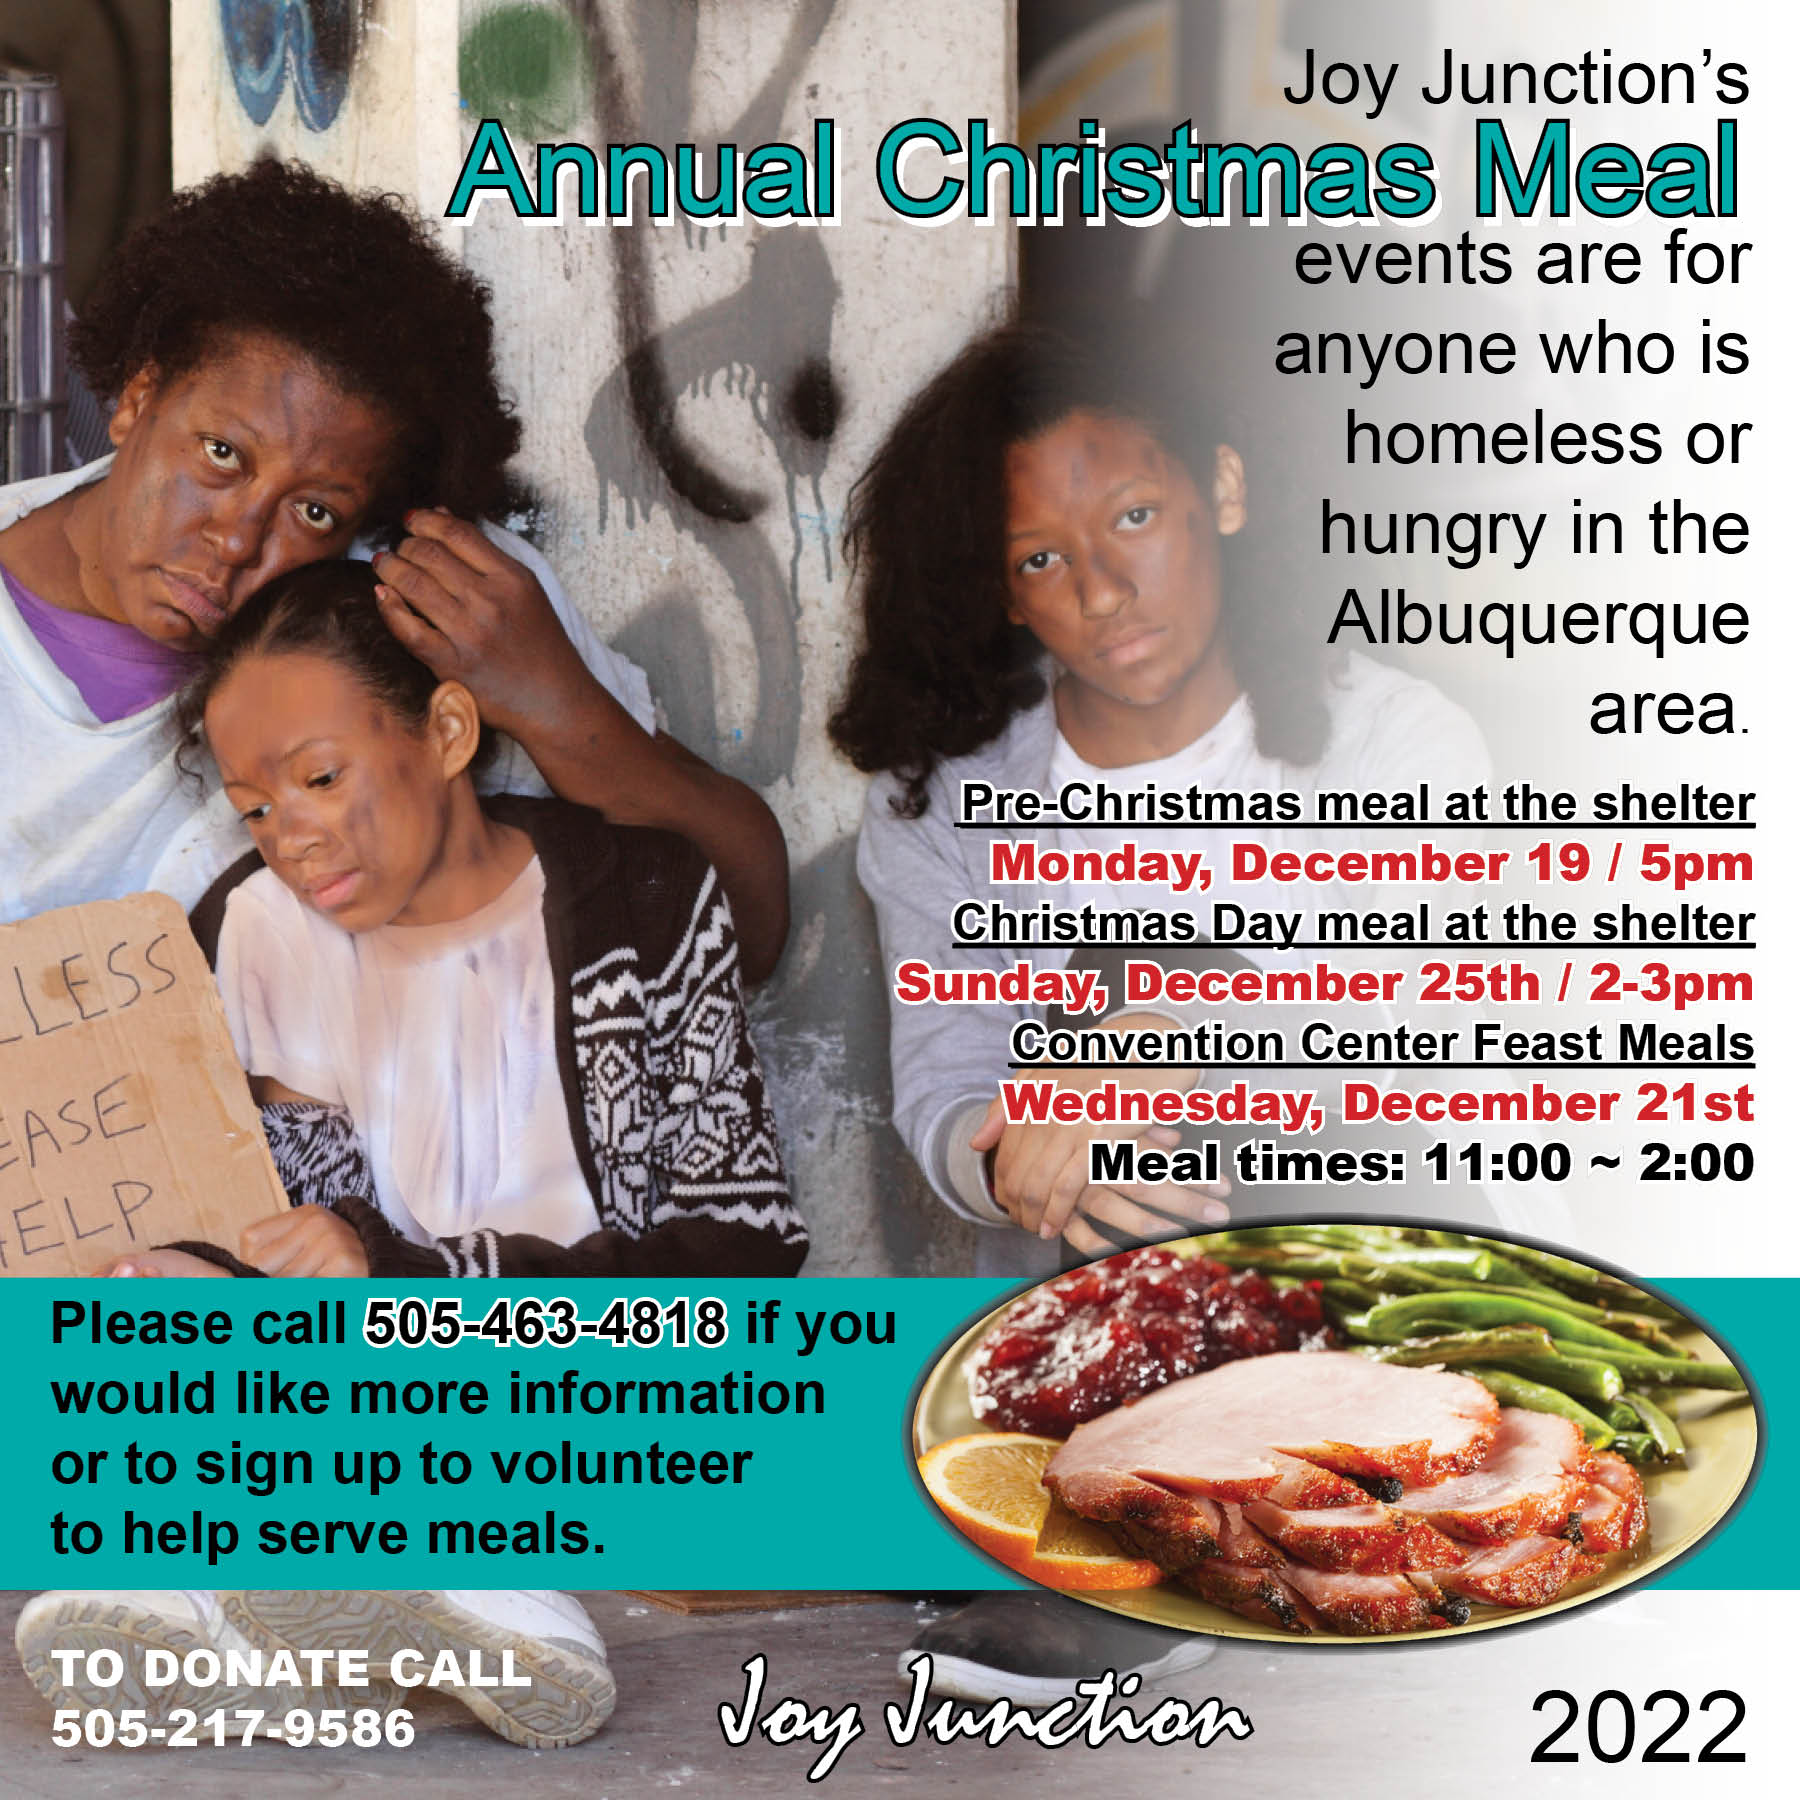 Joy Junction's Annual Christmas Meal